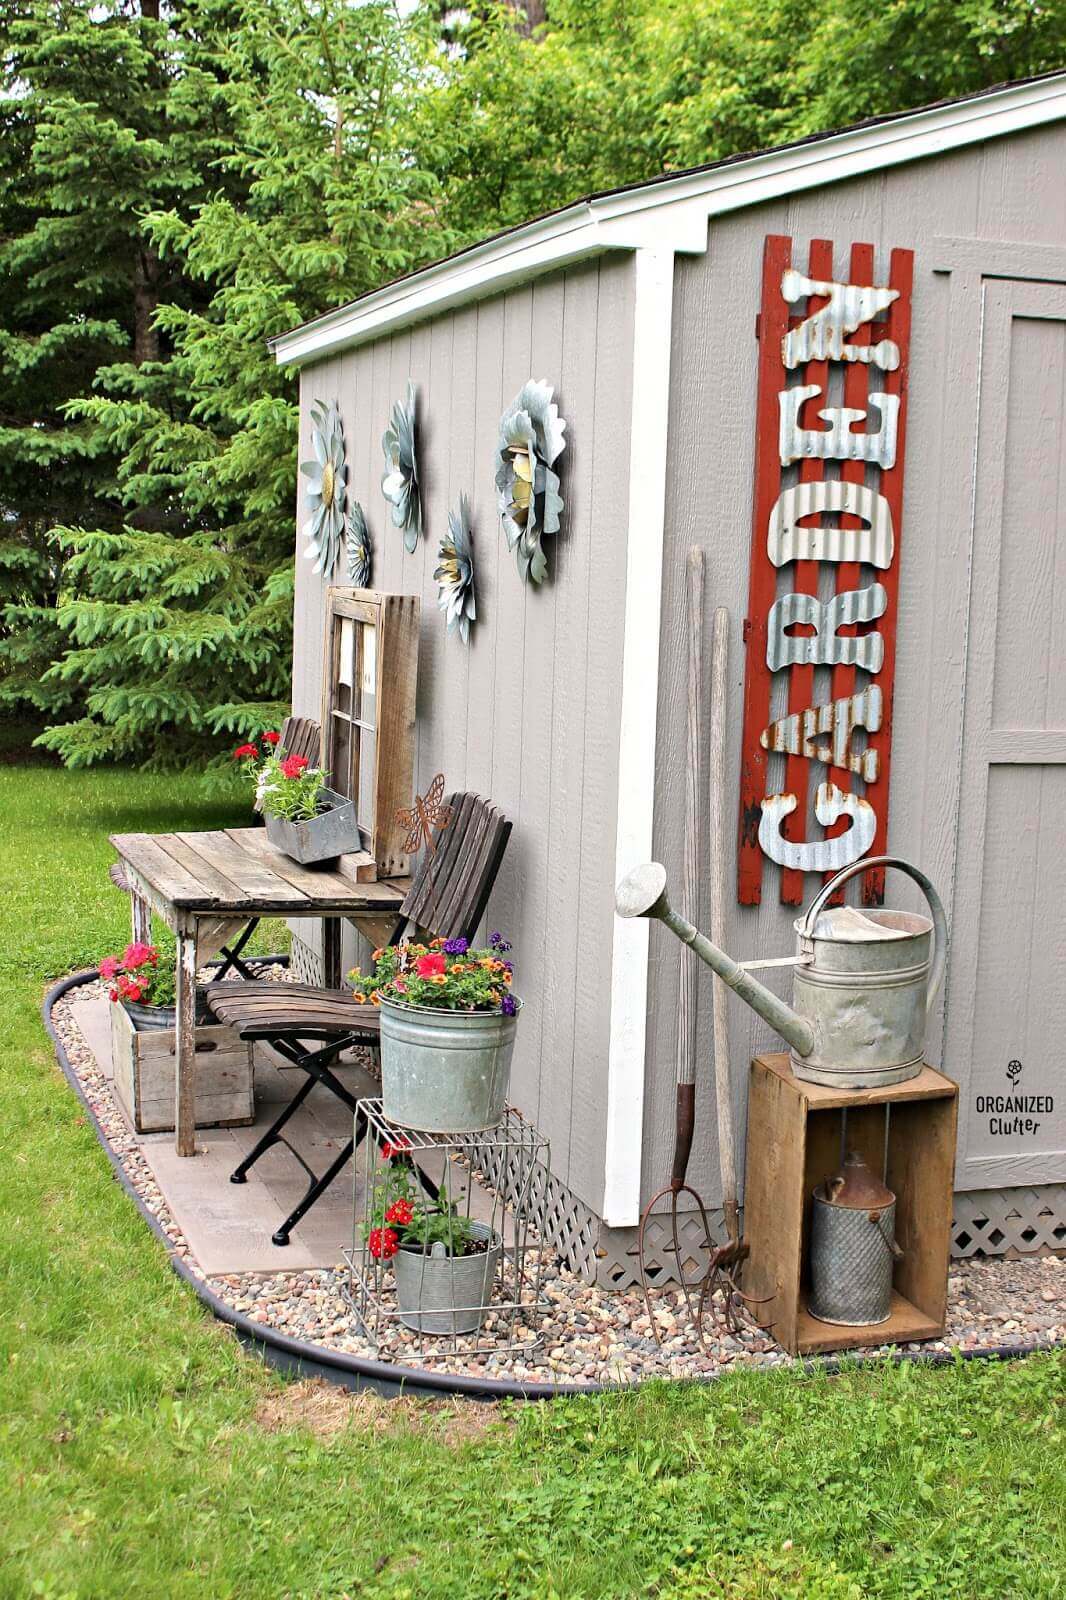 Bold Corrugated Letters on the Shed | Funny DIY Garden Sign Ideas